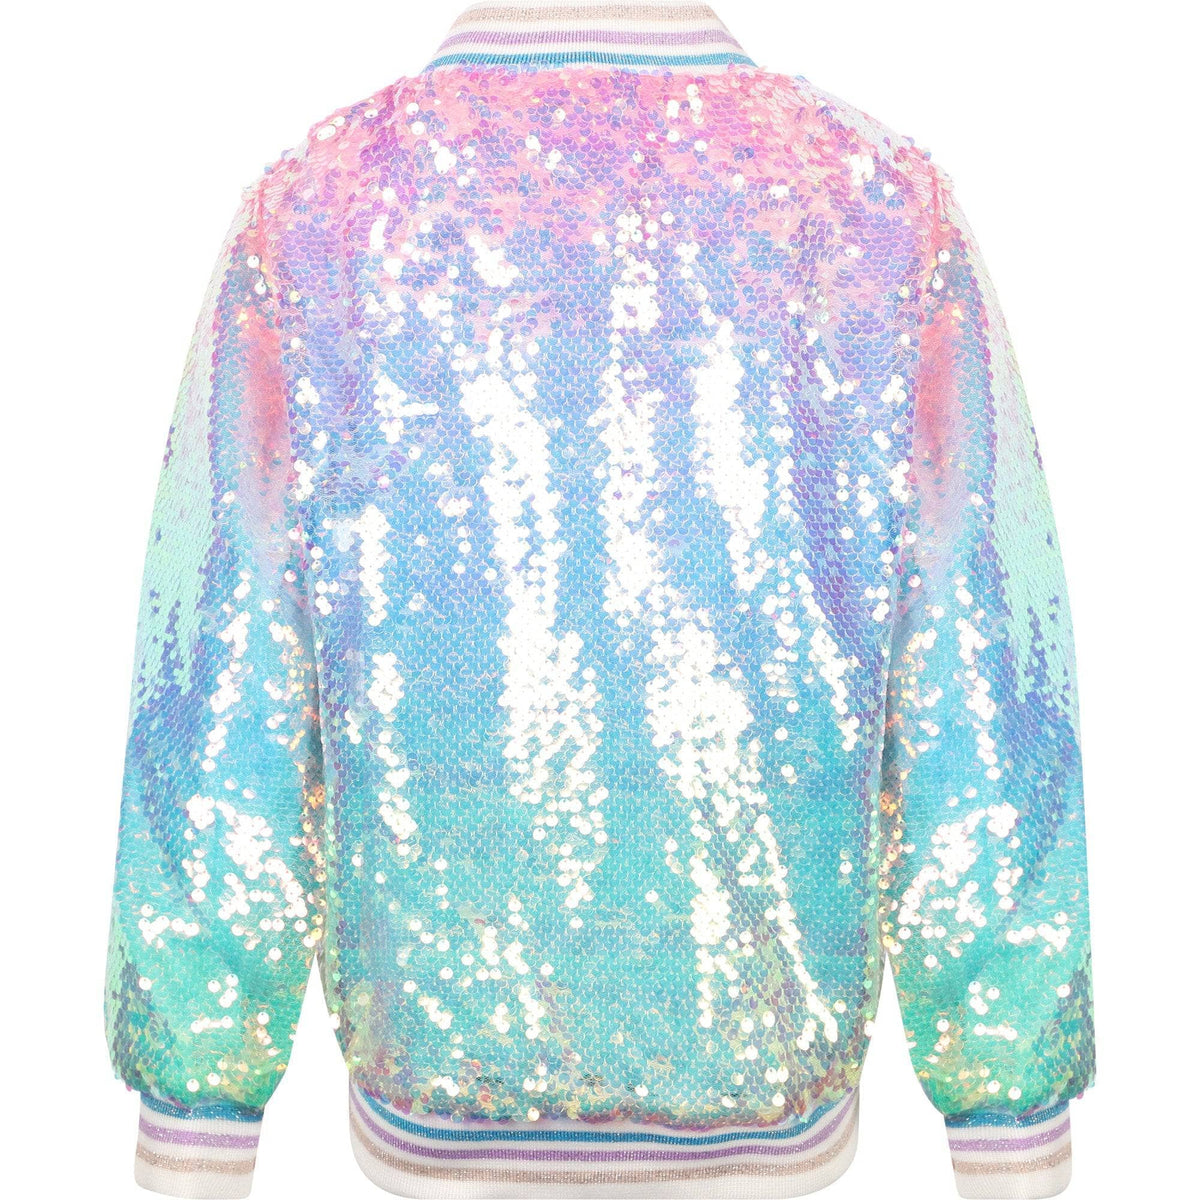 Lola + The Boys Icy Ombre Sequin Jacket